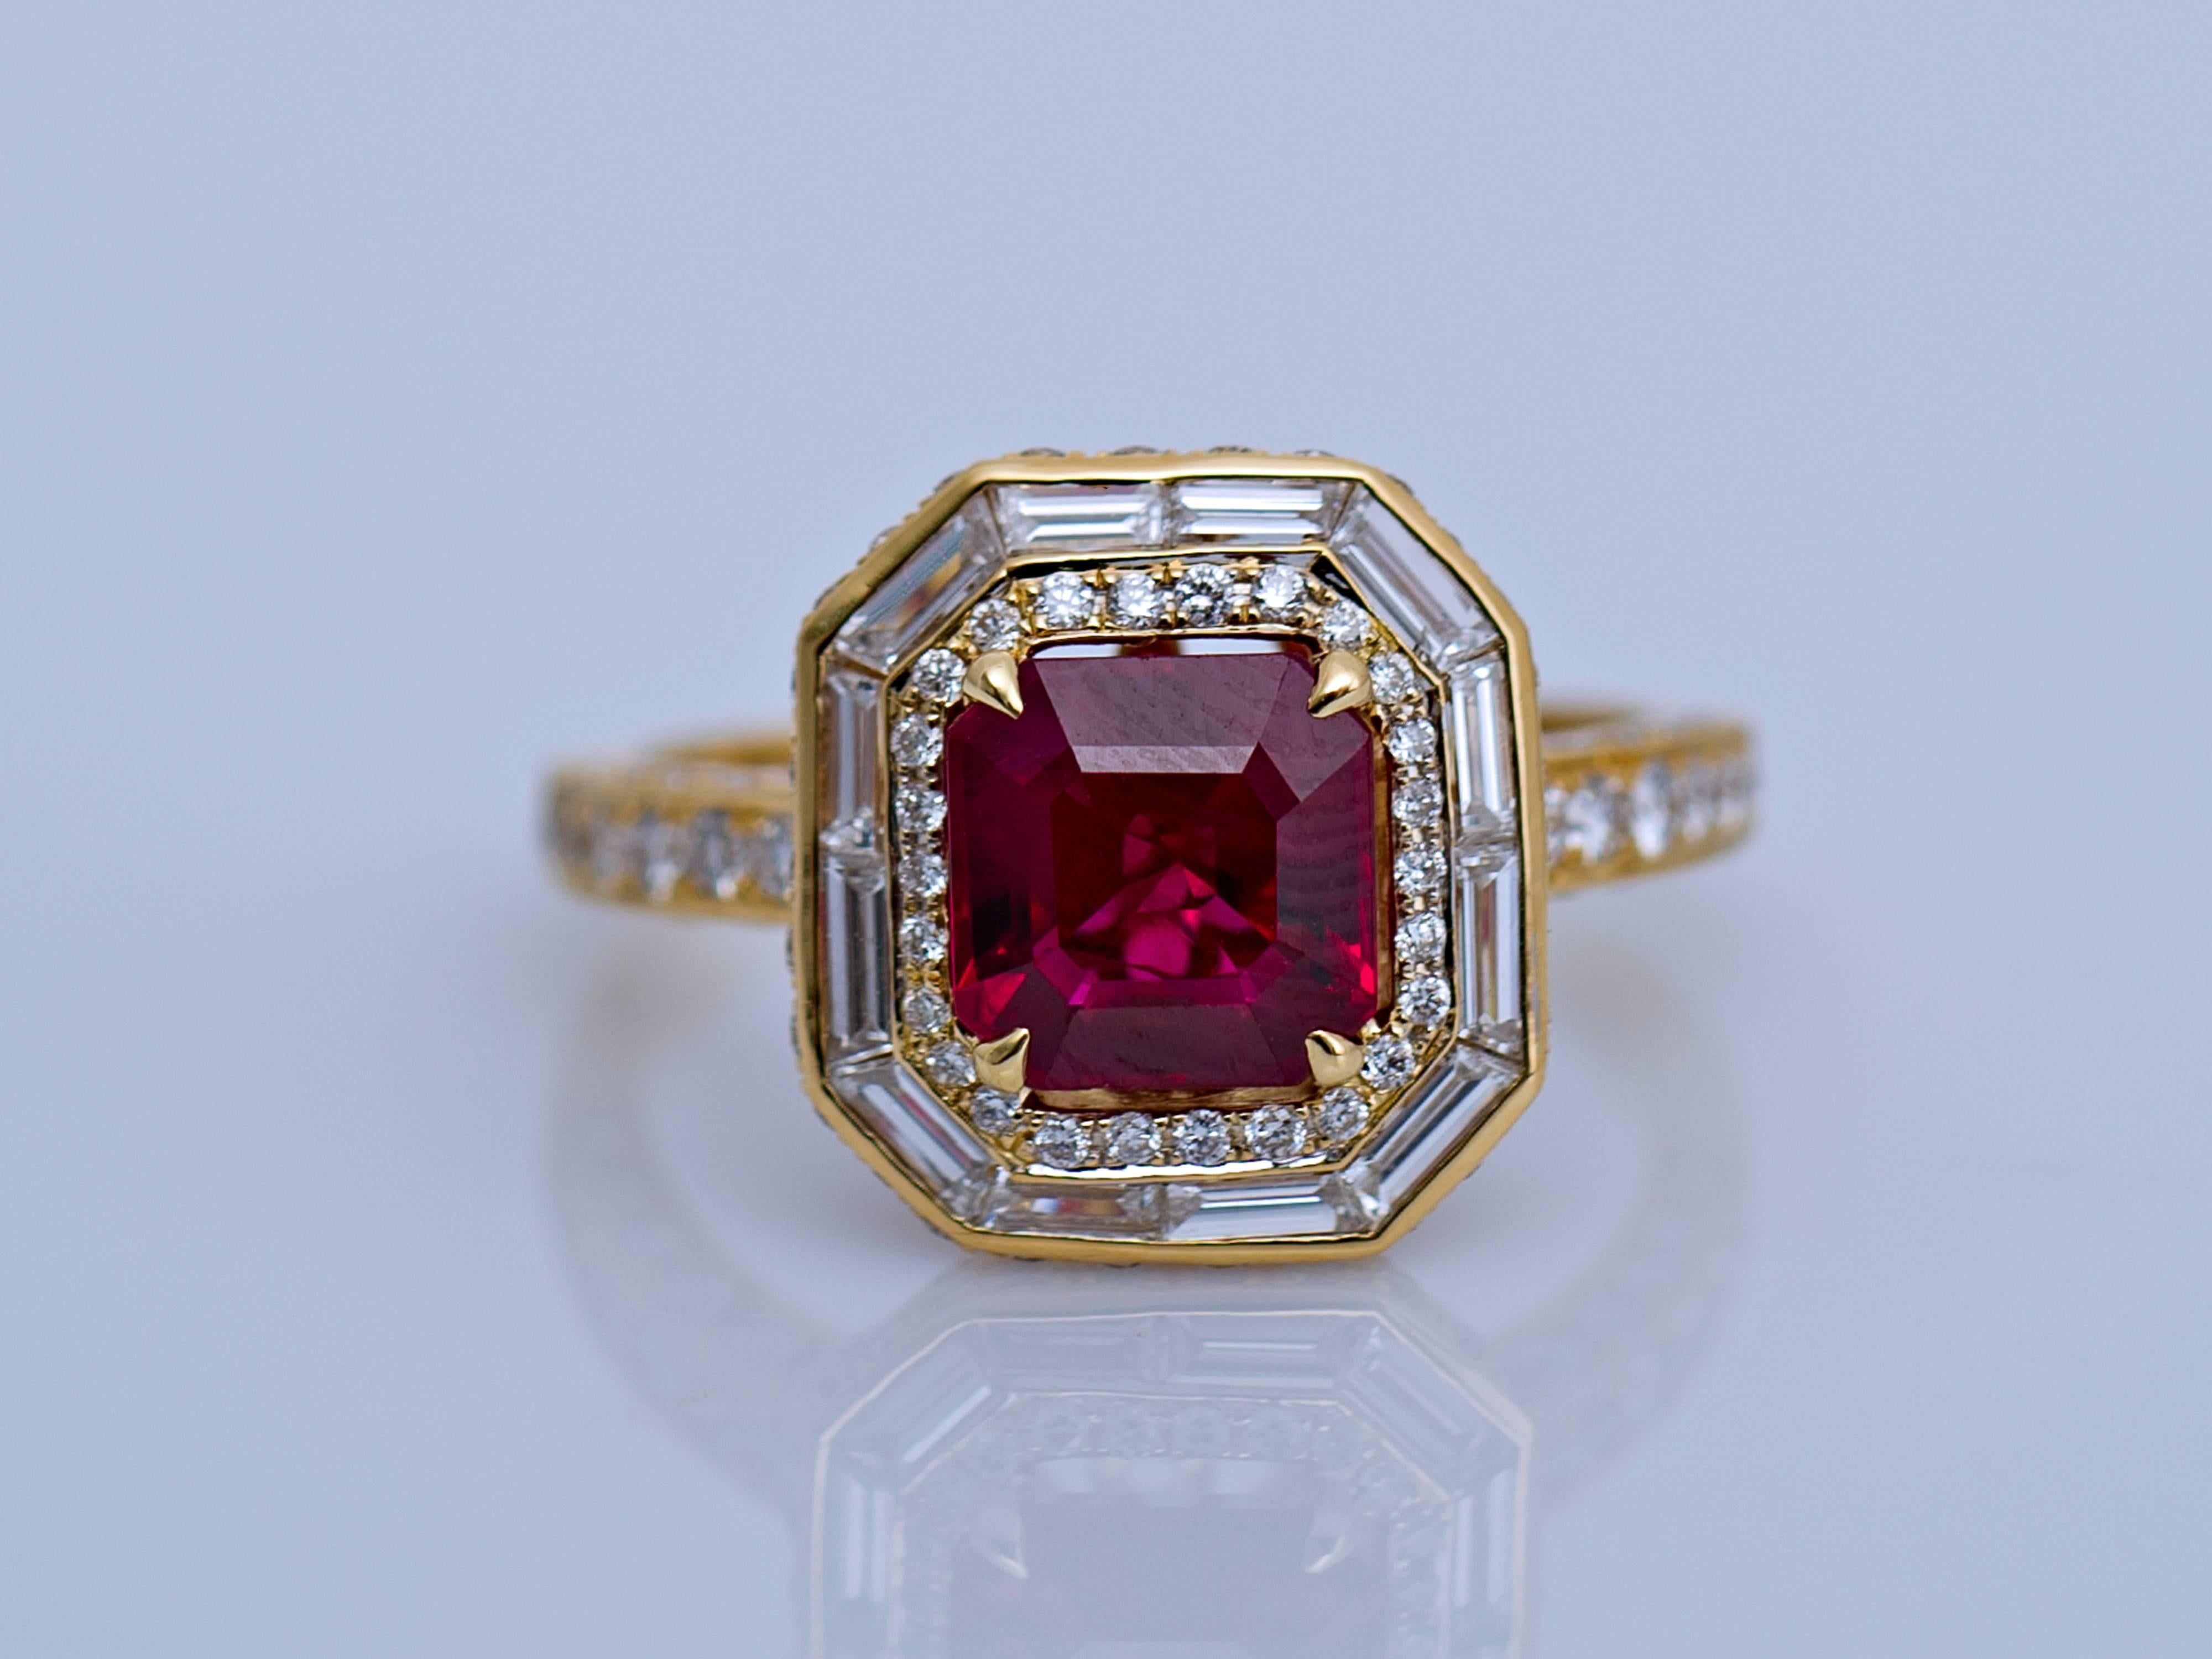 The octogonal Shaped 'Pigeon Blood' Ruby weighing 1.98 Carats set in the centre of the ring, bordered by small pavé-set diamonds and baguette shaped diamonds. The ring is crafted in 18k yellow gold and is surrounded by over 100 diamonds.

Purchase